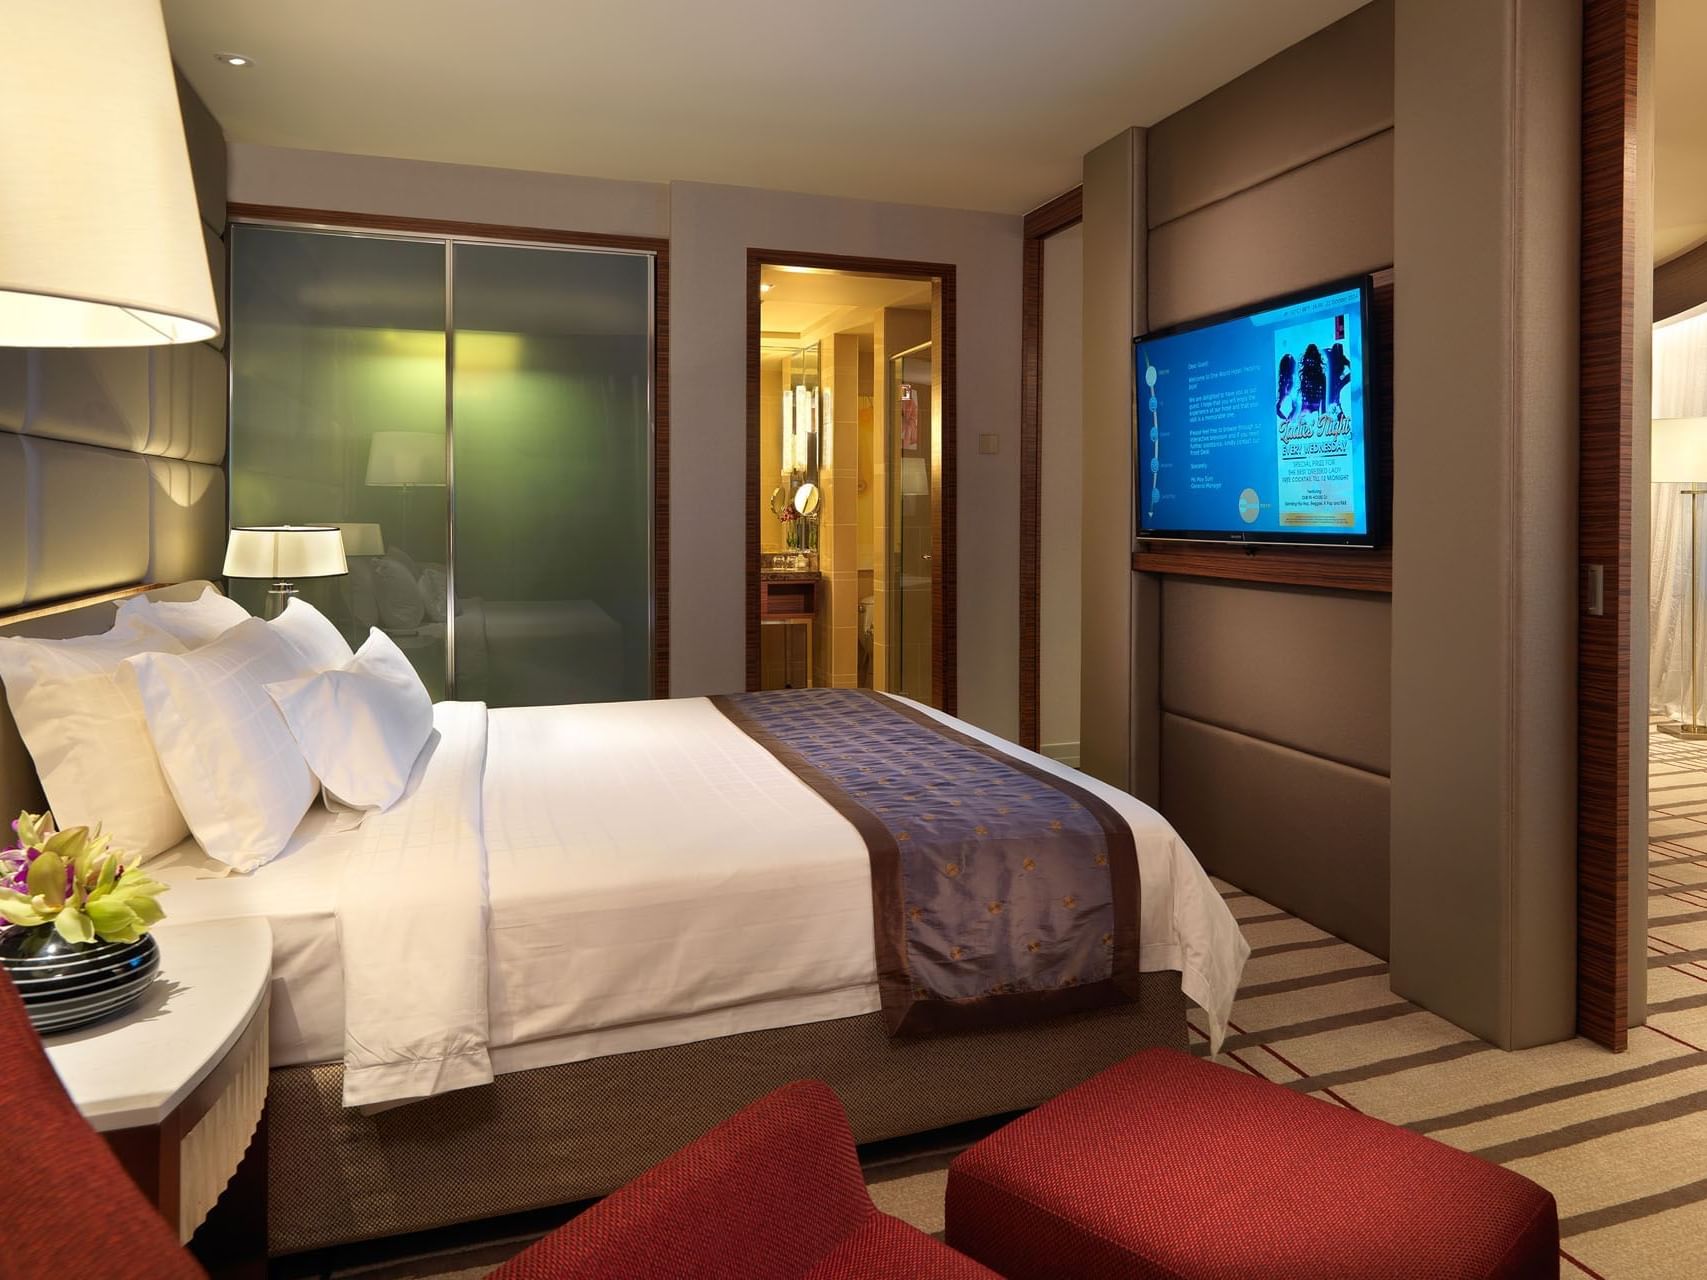 Modern interior & decor in Junior Suit with carpeted floors, A One World Hotel room